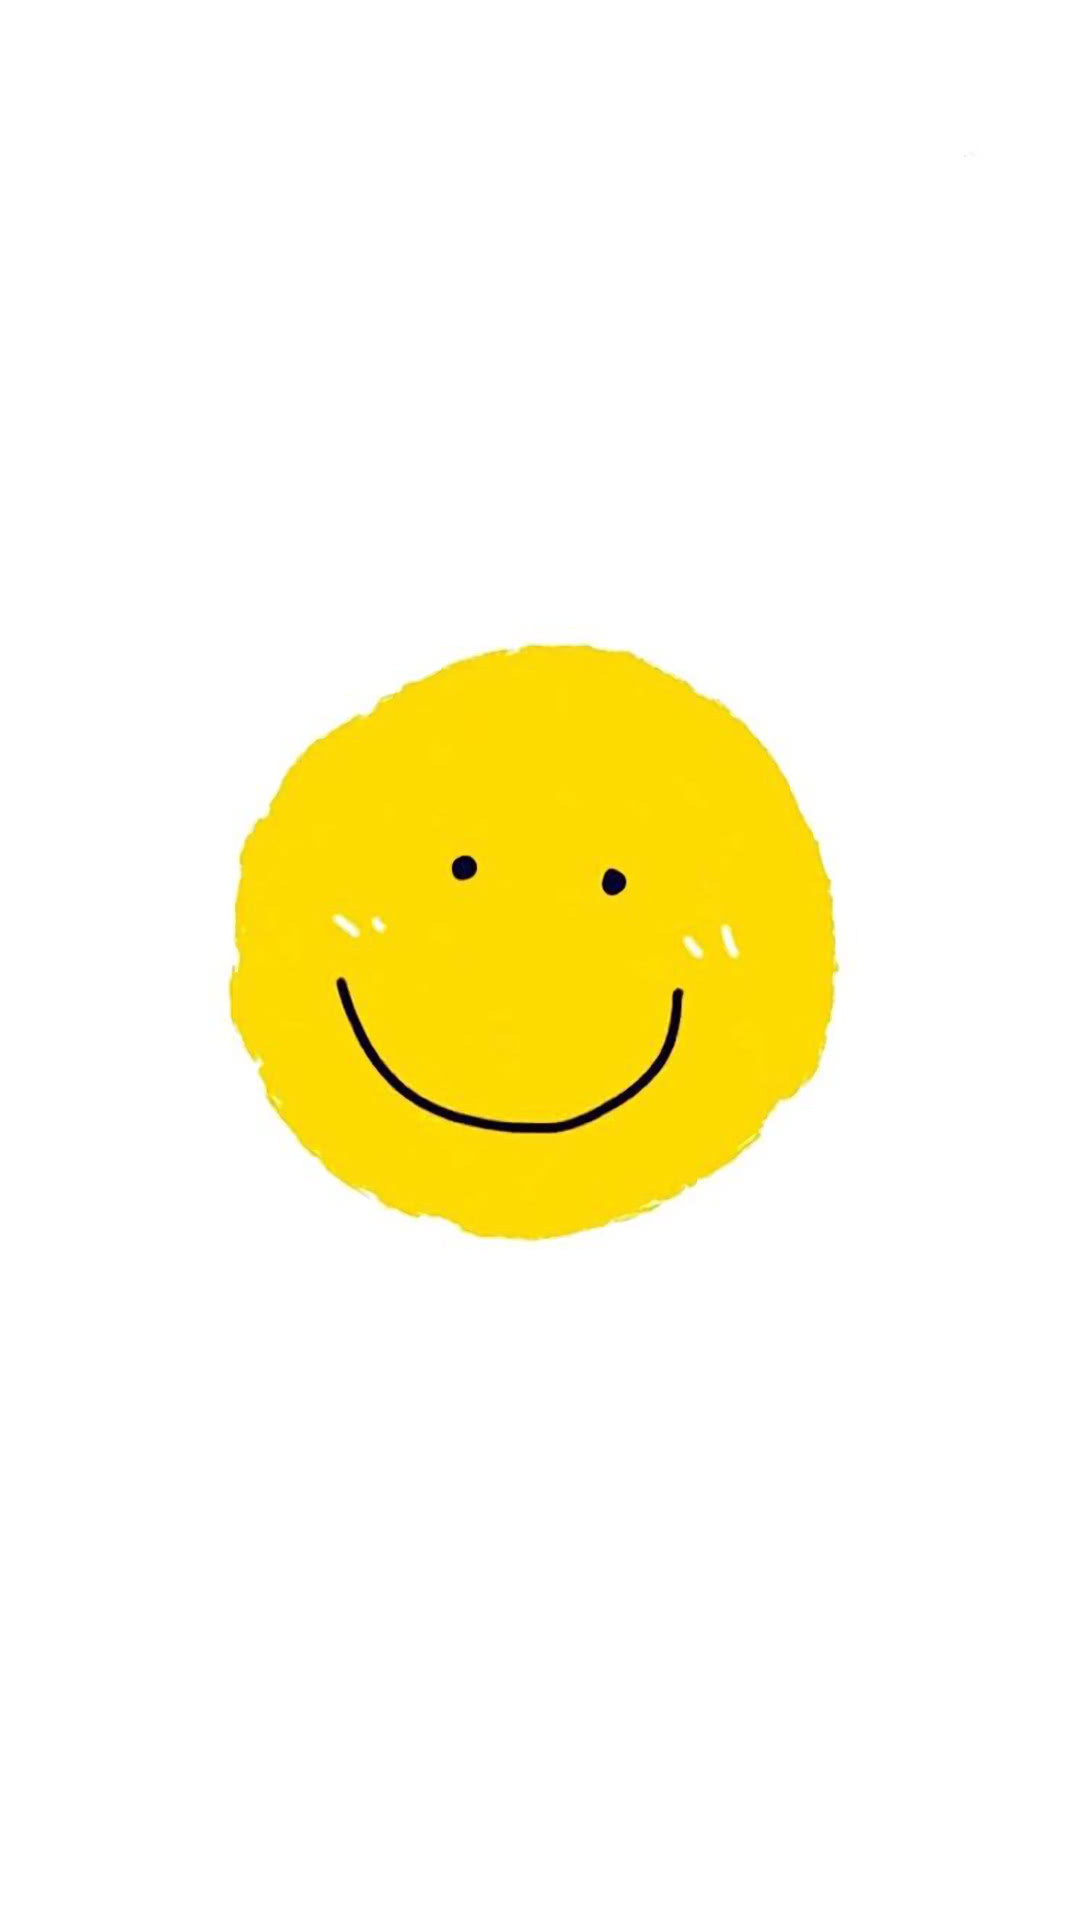 A yellow smiley face on white background - Smile